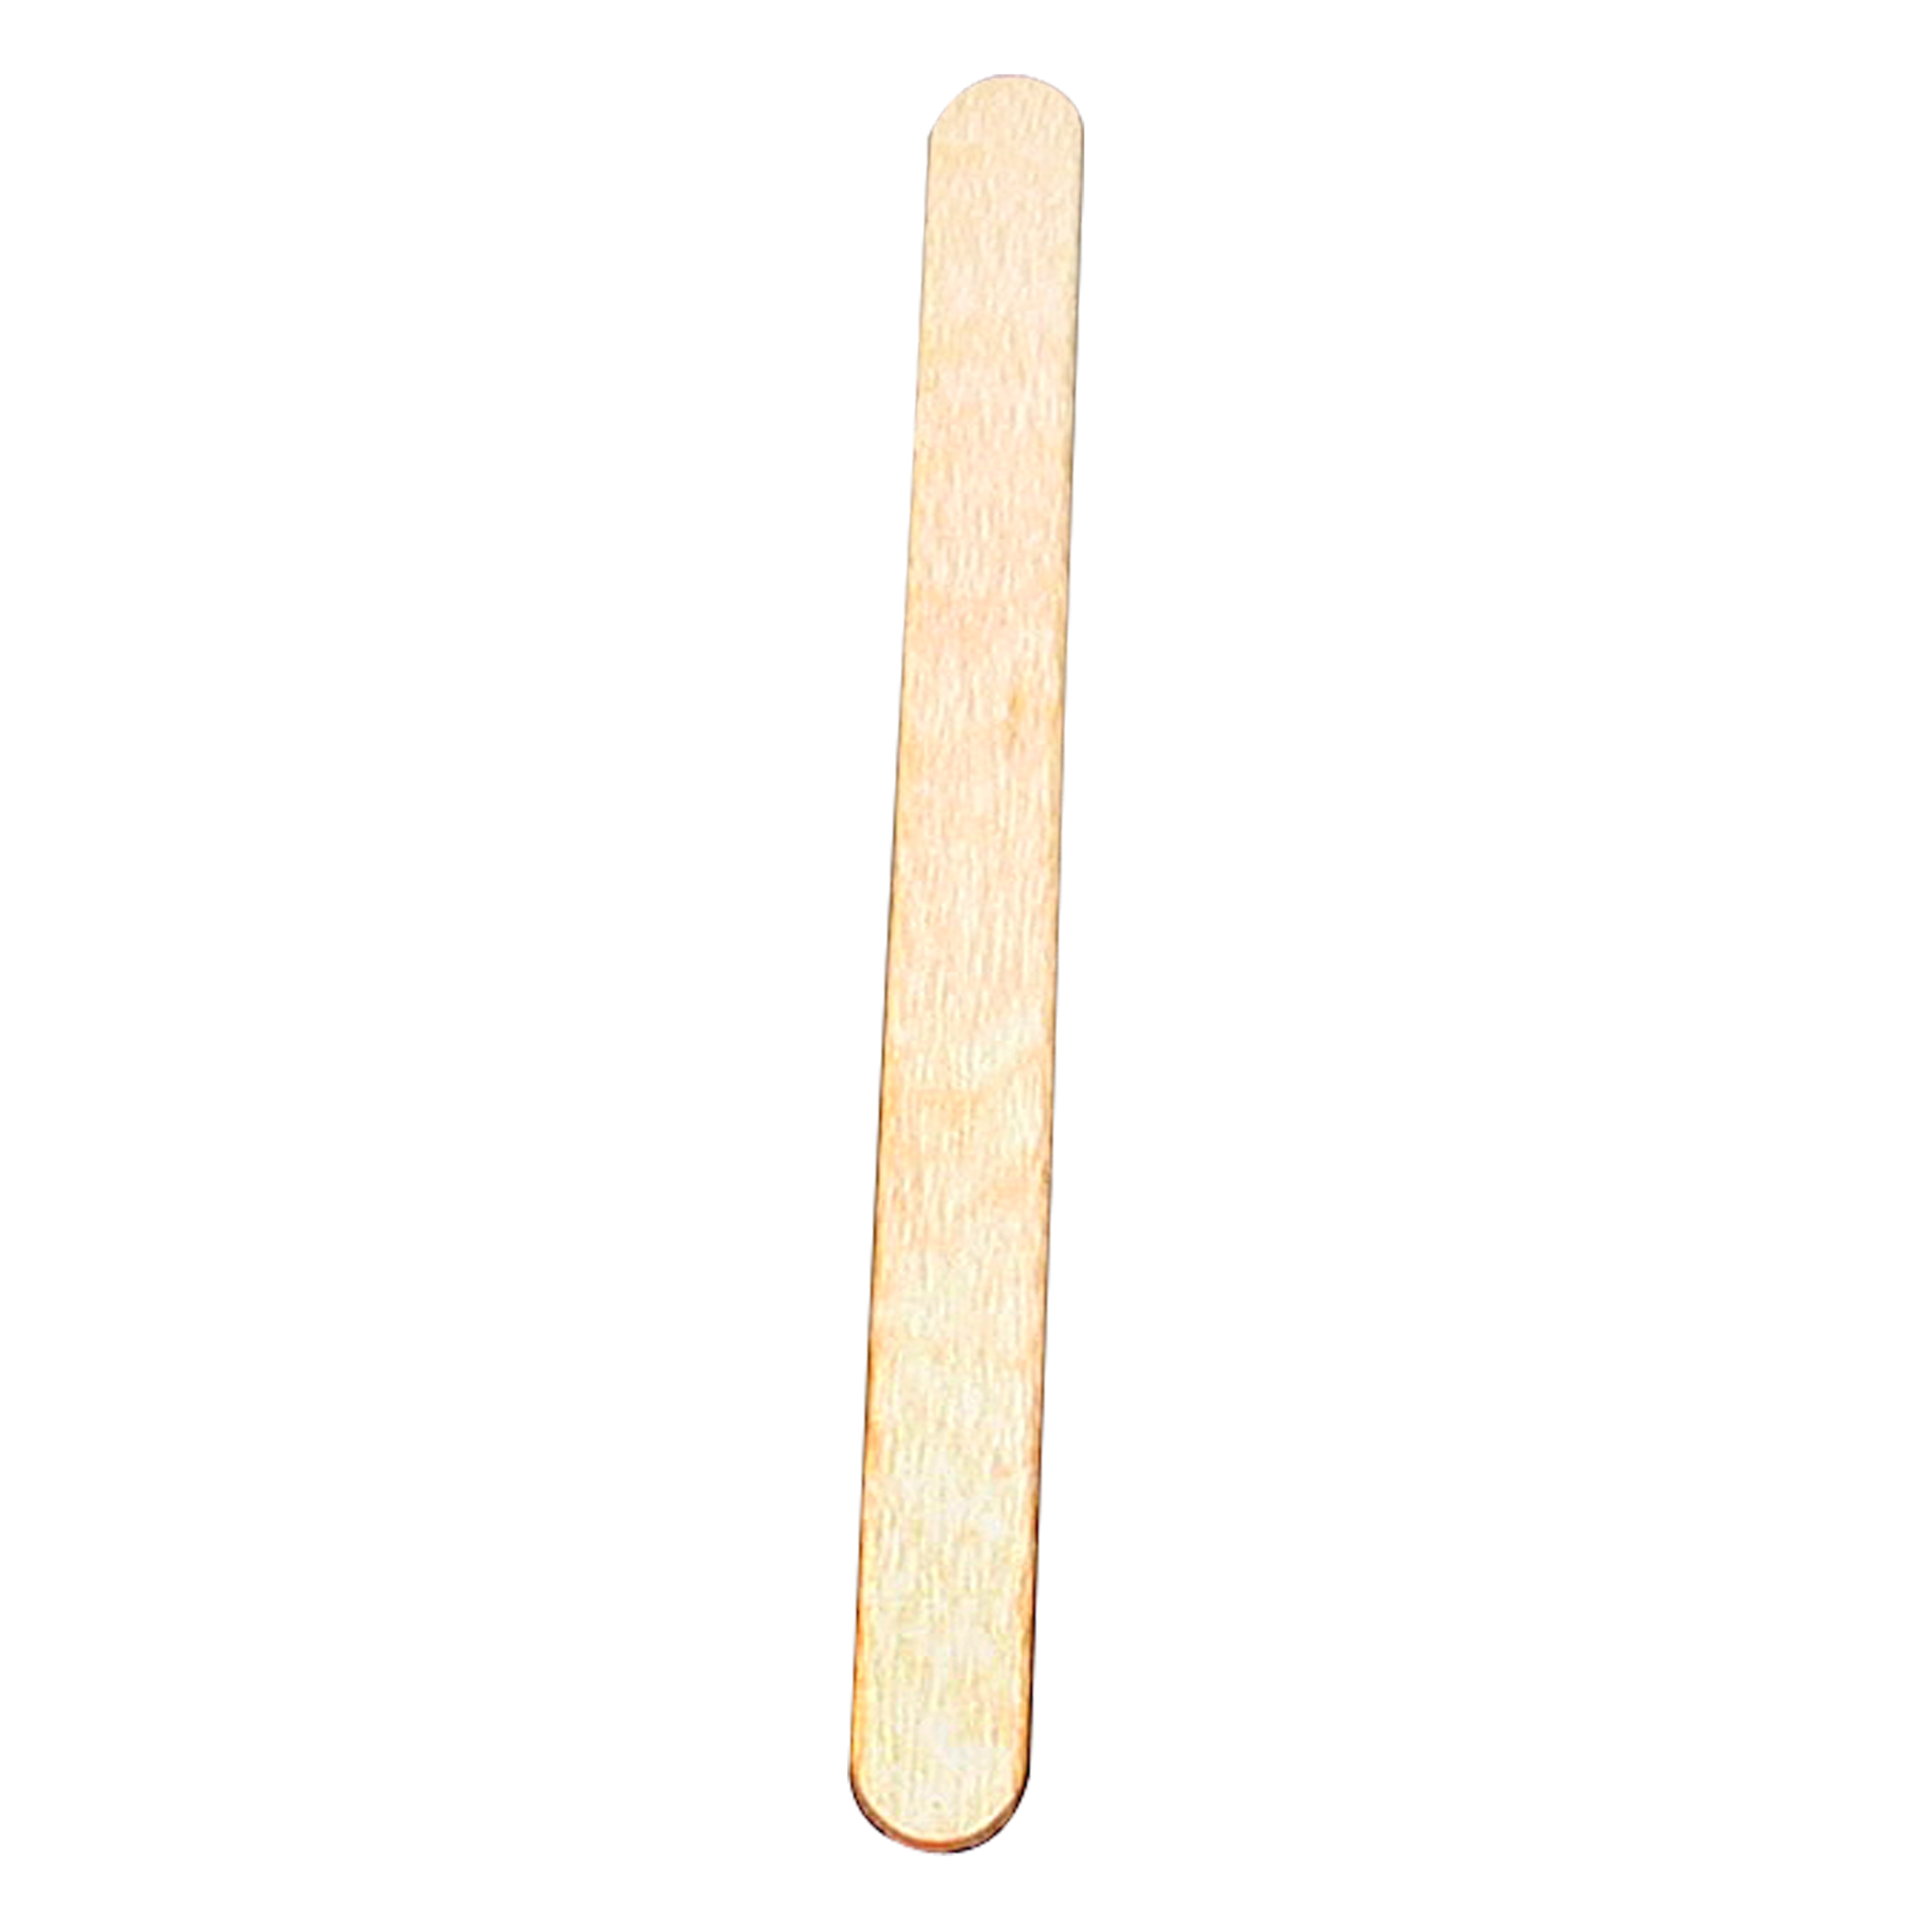 4.5" Wood Applicators Products, Supplies and Equipment